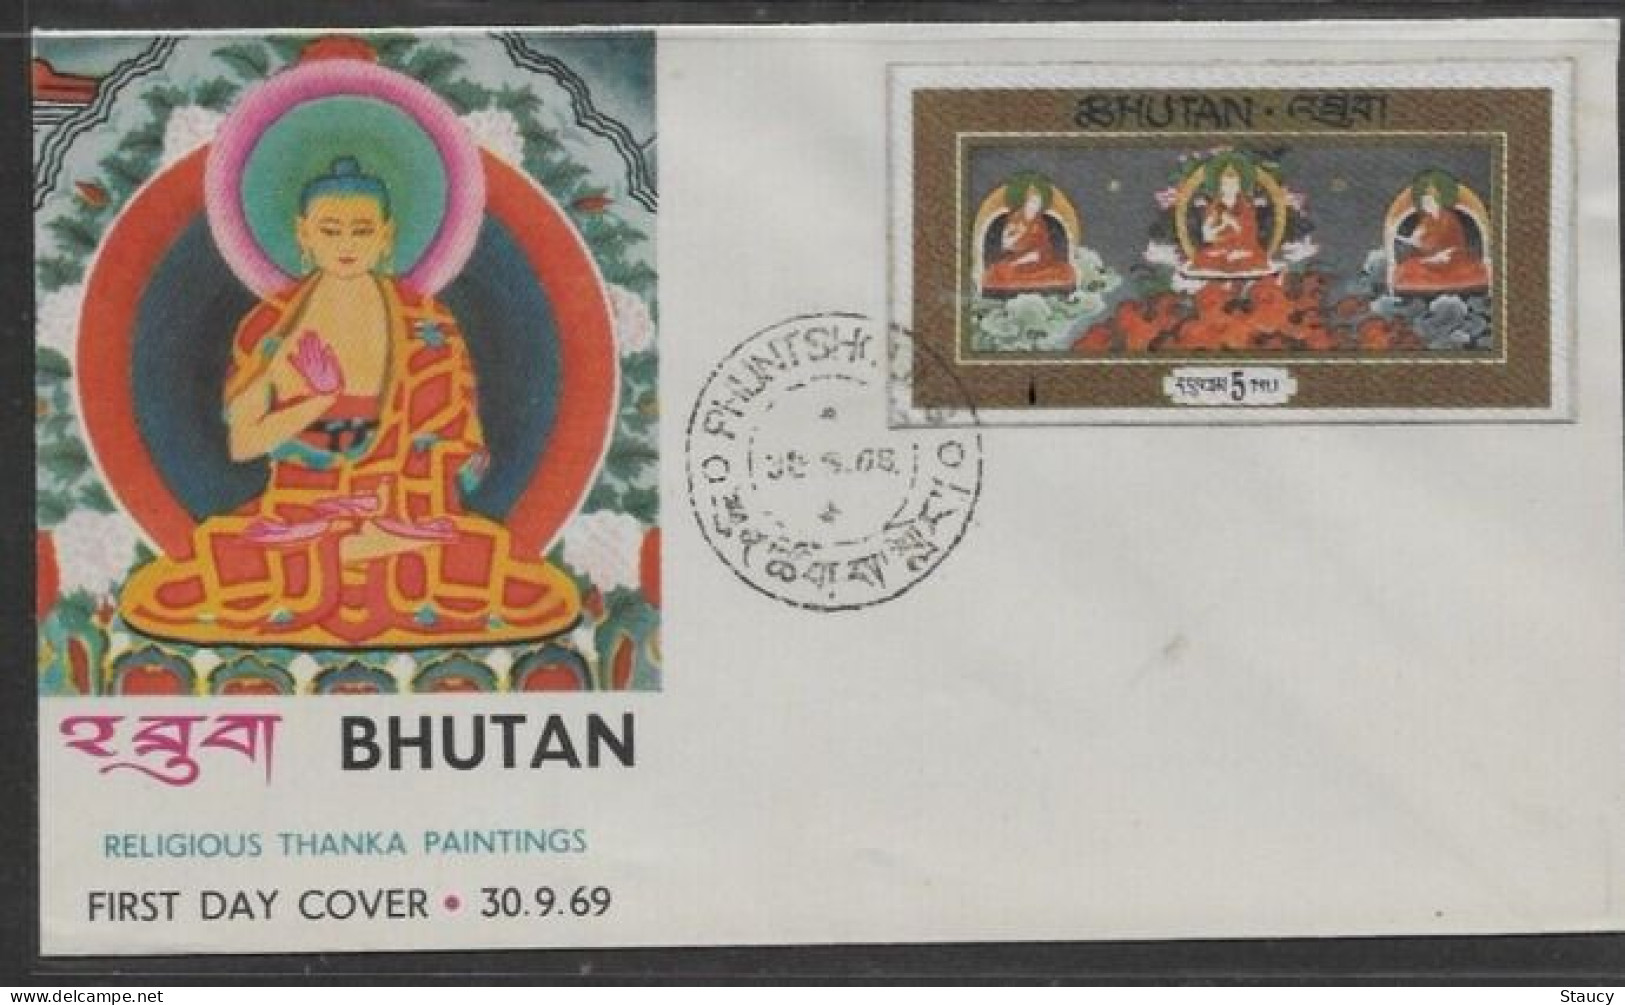 BHUTAN 1969 RELIGIOUS THANKA PAINTINGS BUDHA - SILK CLOTH Unique Stamp Imperf 1v Official FDC As Per Scan - Bhoutan